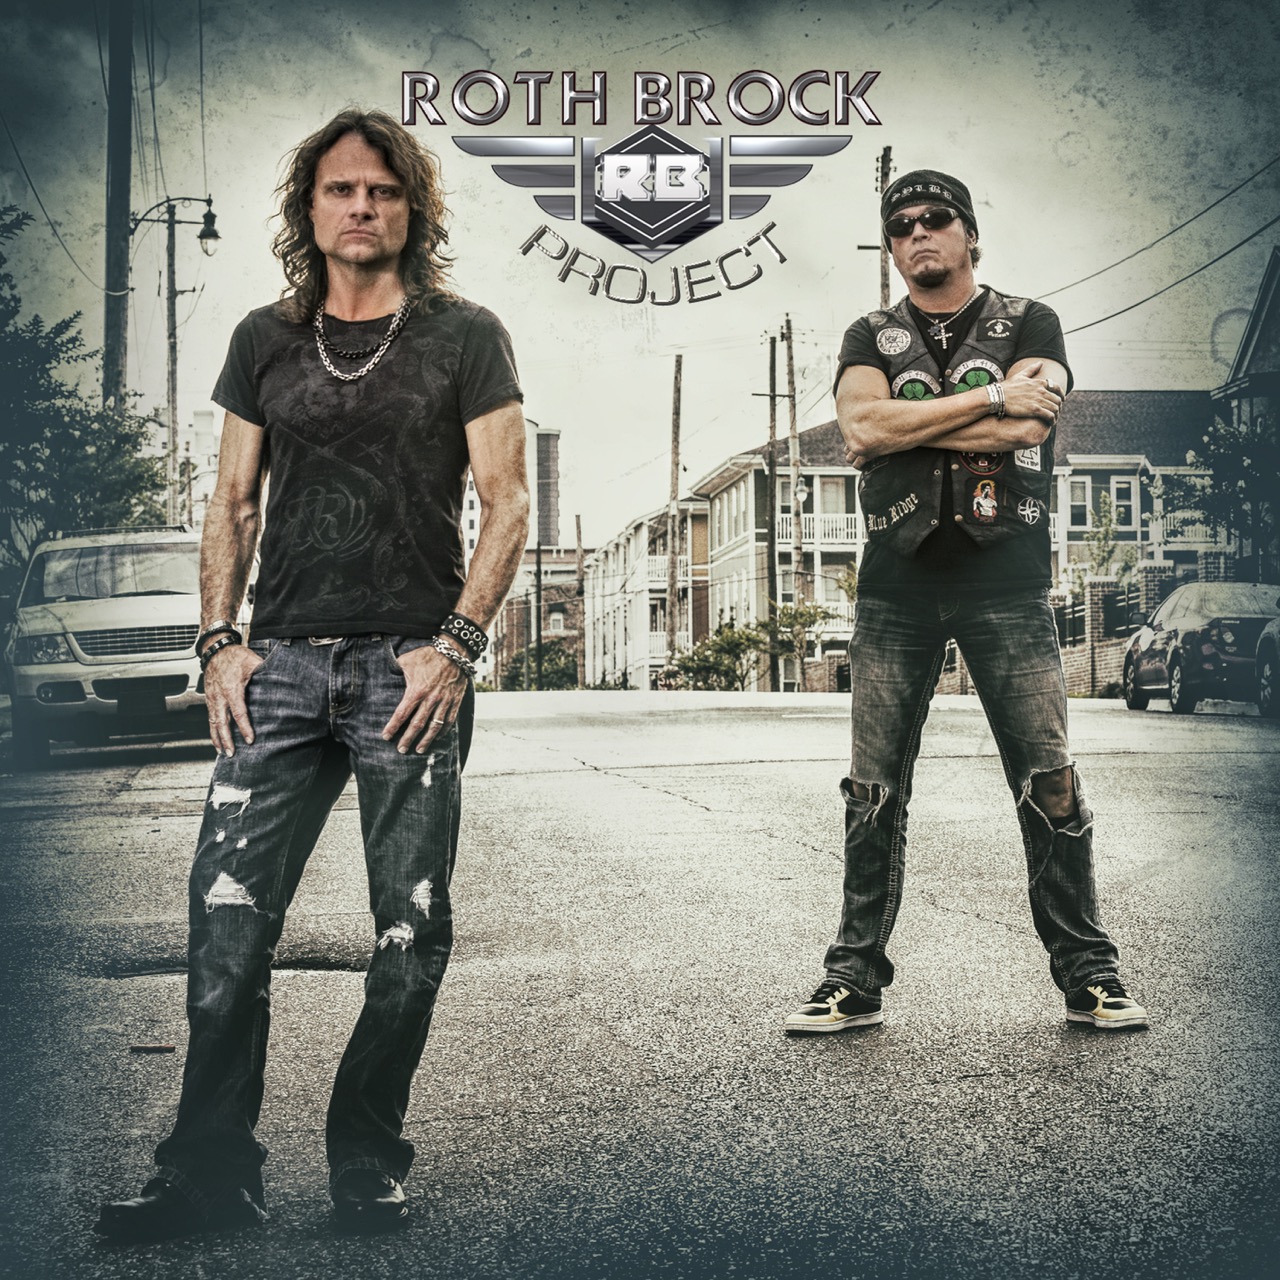 Guitarist John Roth Discusses Gear and the Roth Brock Project – go